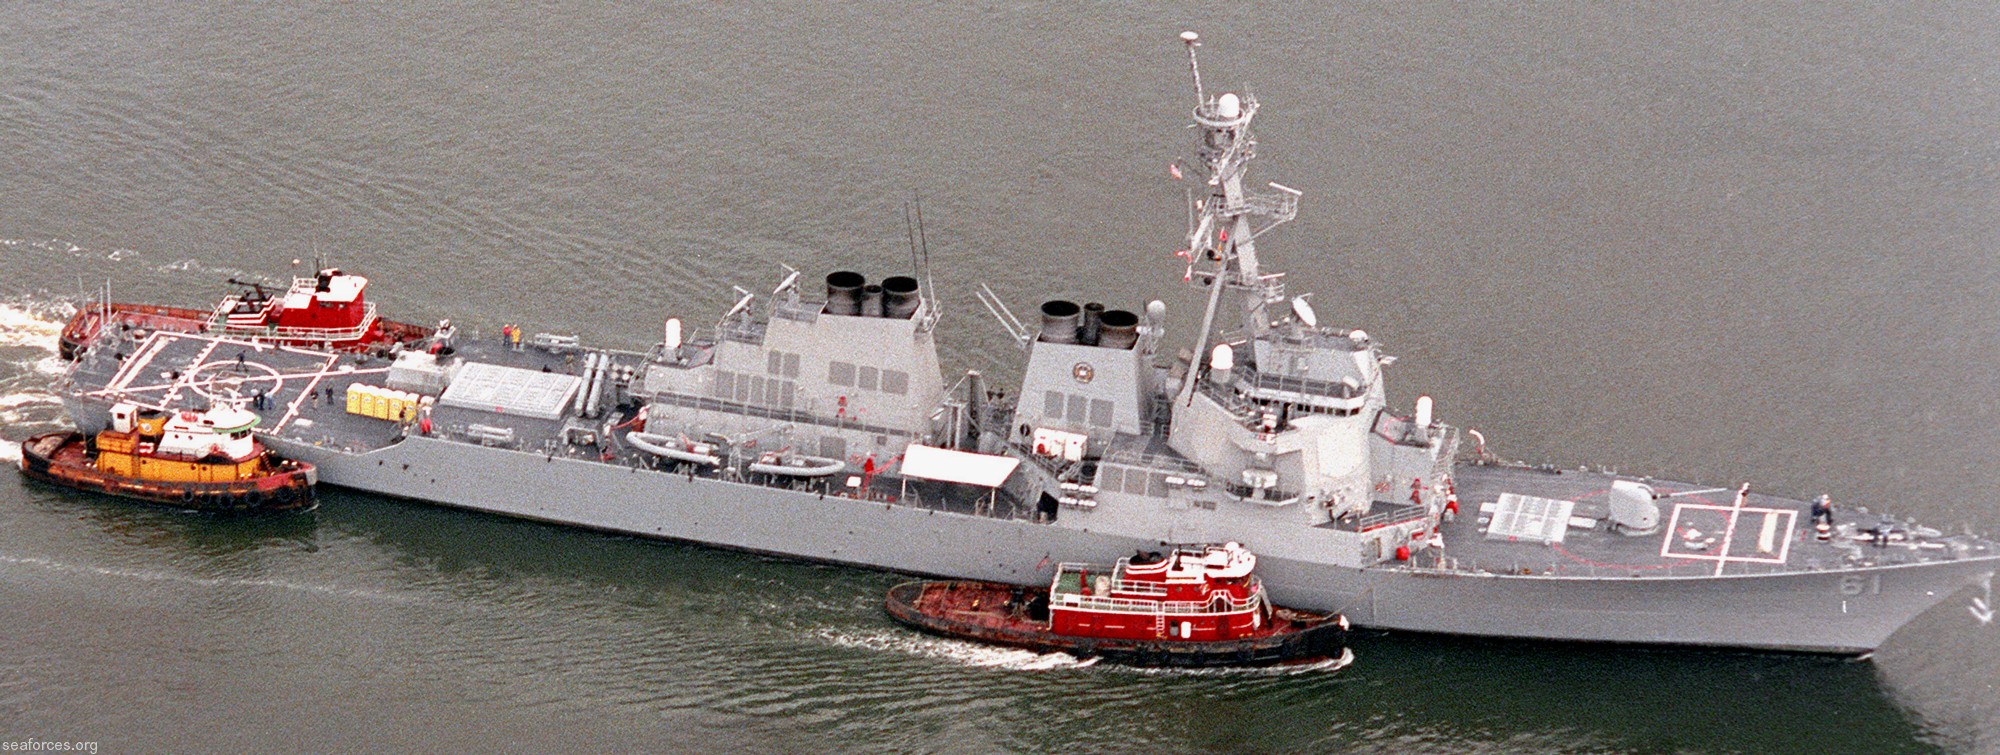 ddg-61 uss ramage guided missile destroyer us navy 74